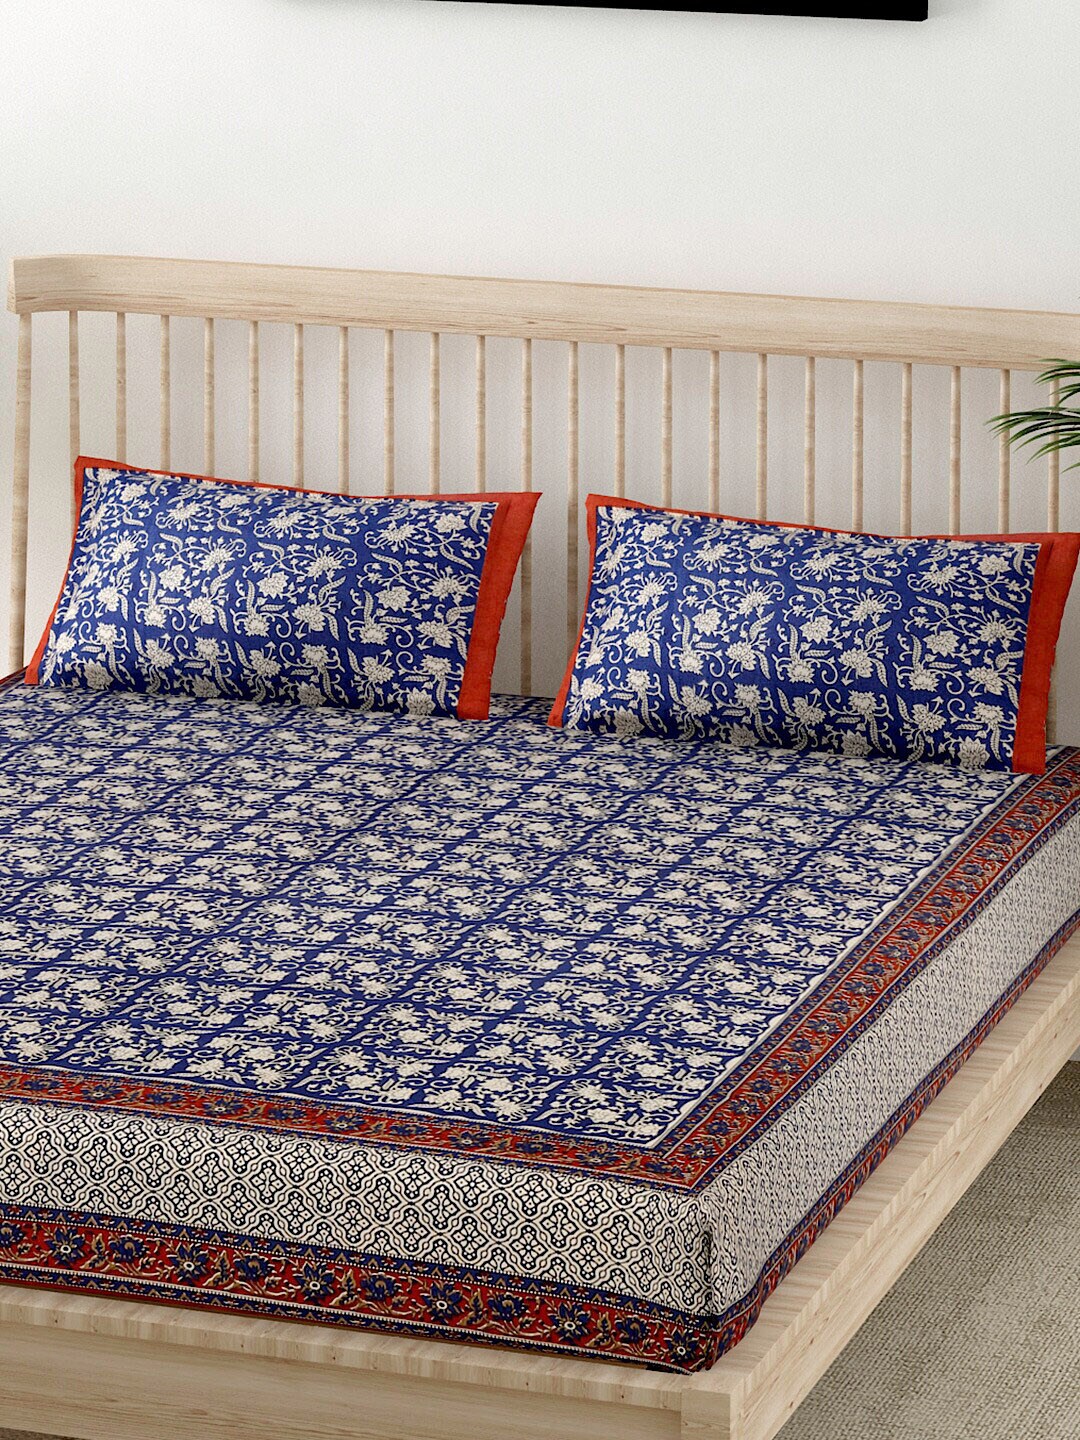 EK BY EKTA KAPOOR Blue & Beige Floral 180 TC Pure Cotton King Bedsheet with 2 Pillow Covers Price in India